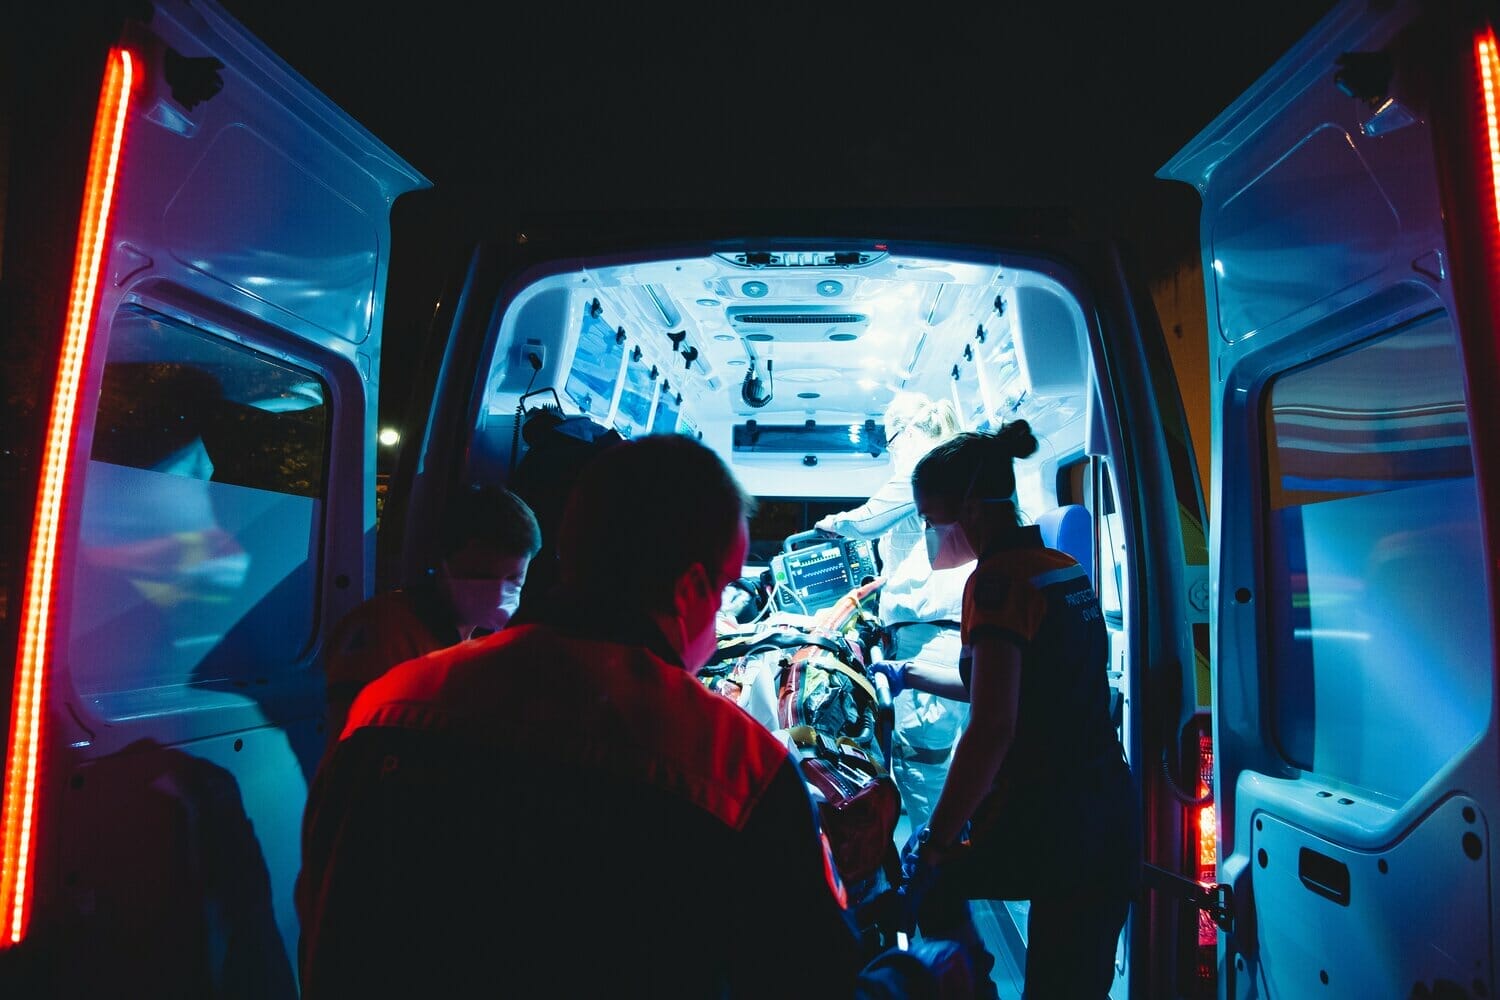 View into the back of an ambulance responding to a call